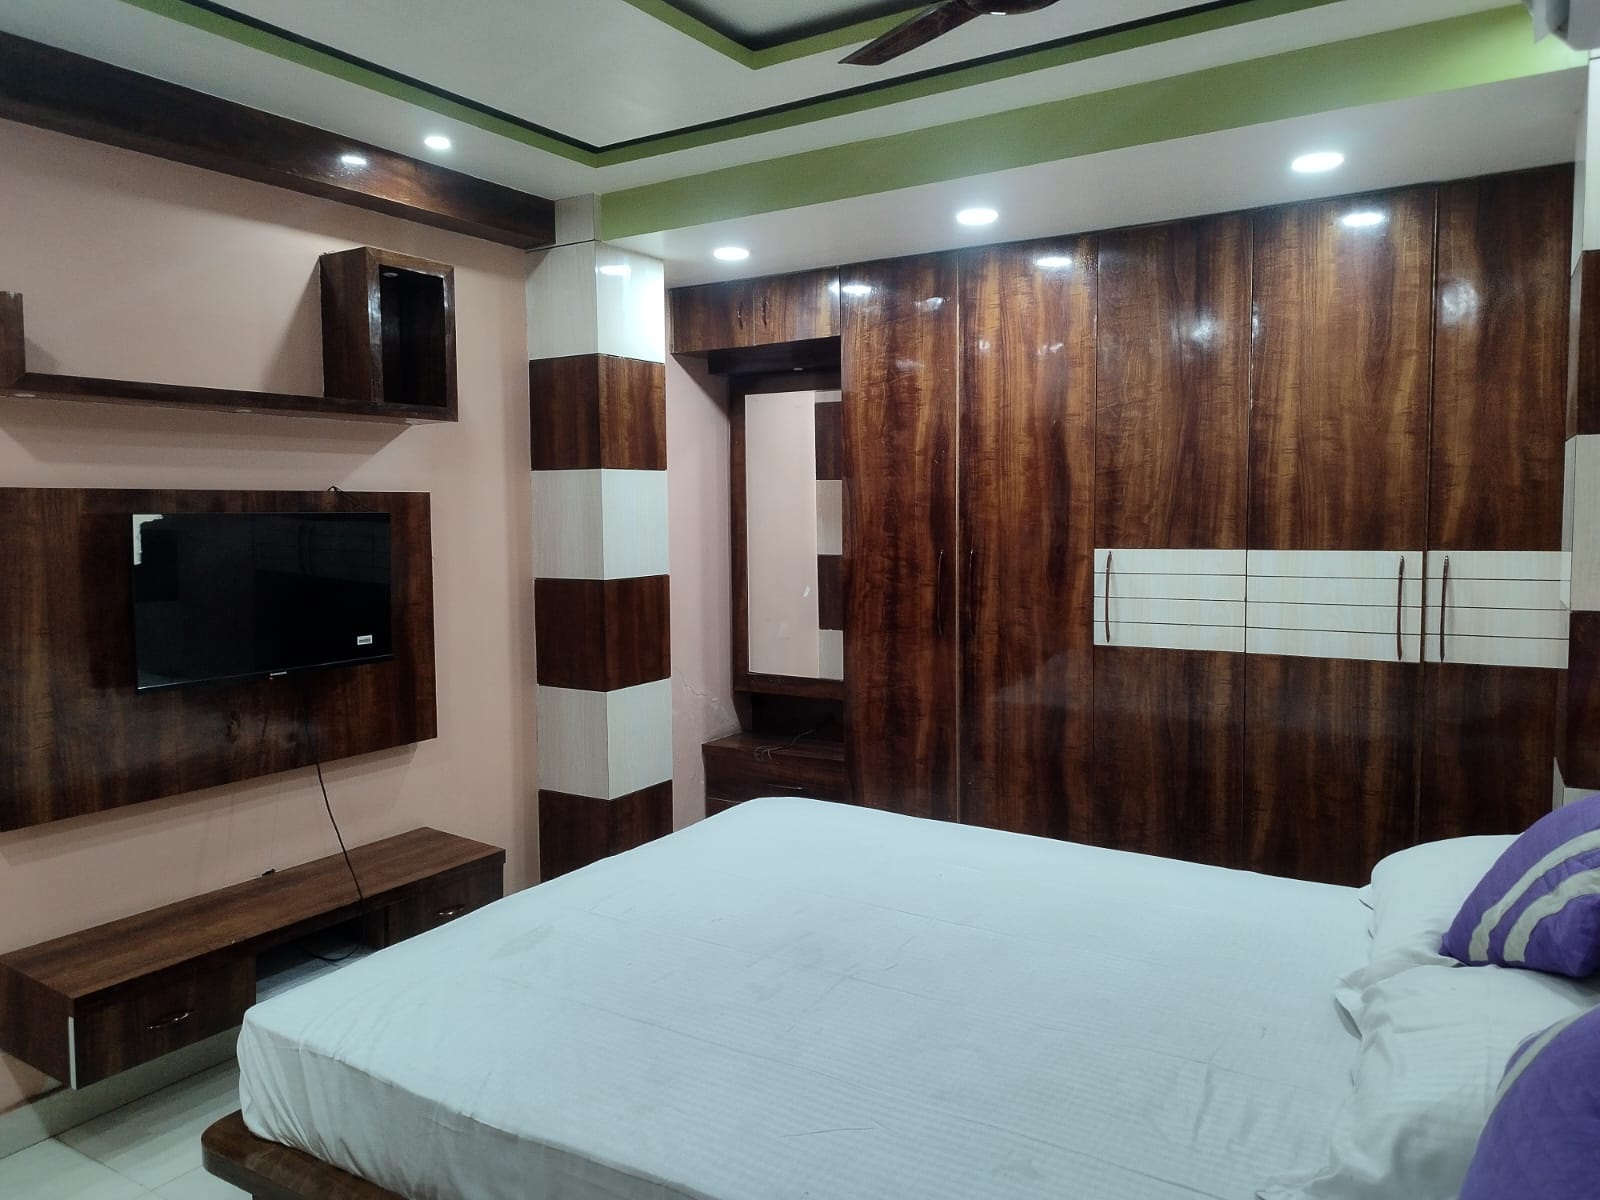 Best hotels near by patna junction, best hotels in kankarbagh